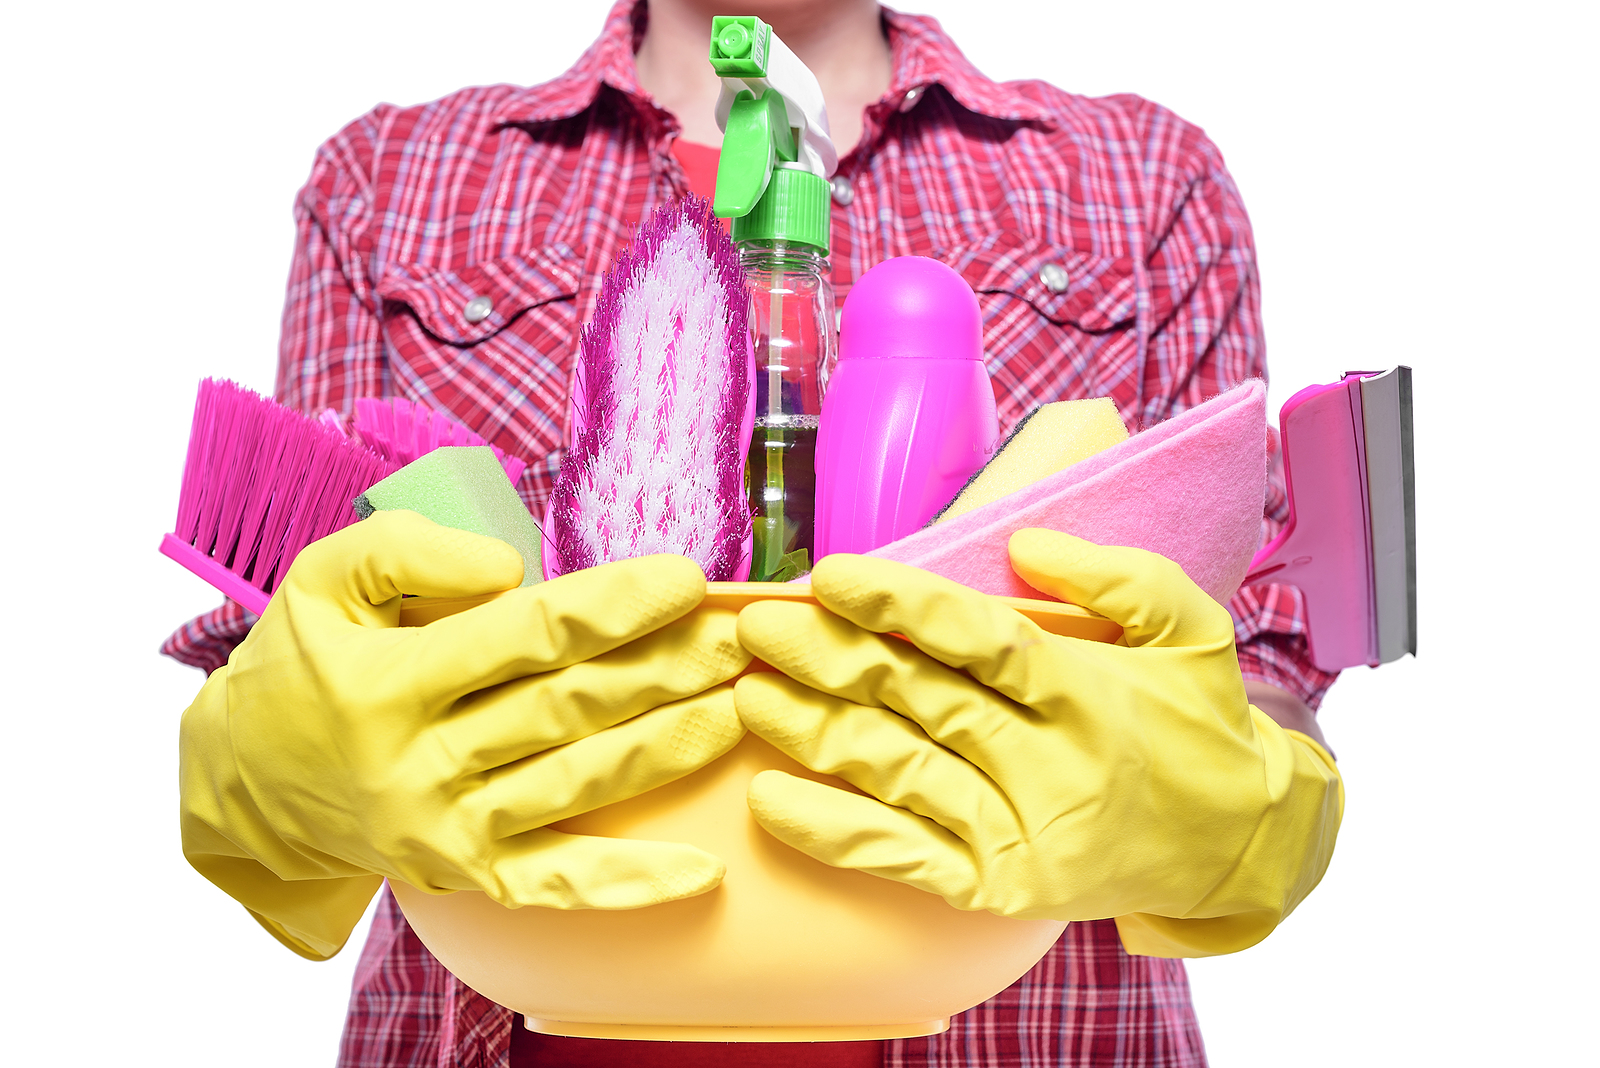 Women Holding Homemade Floor Cleaning Products 